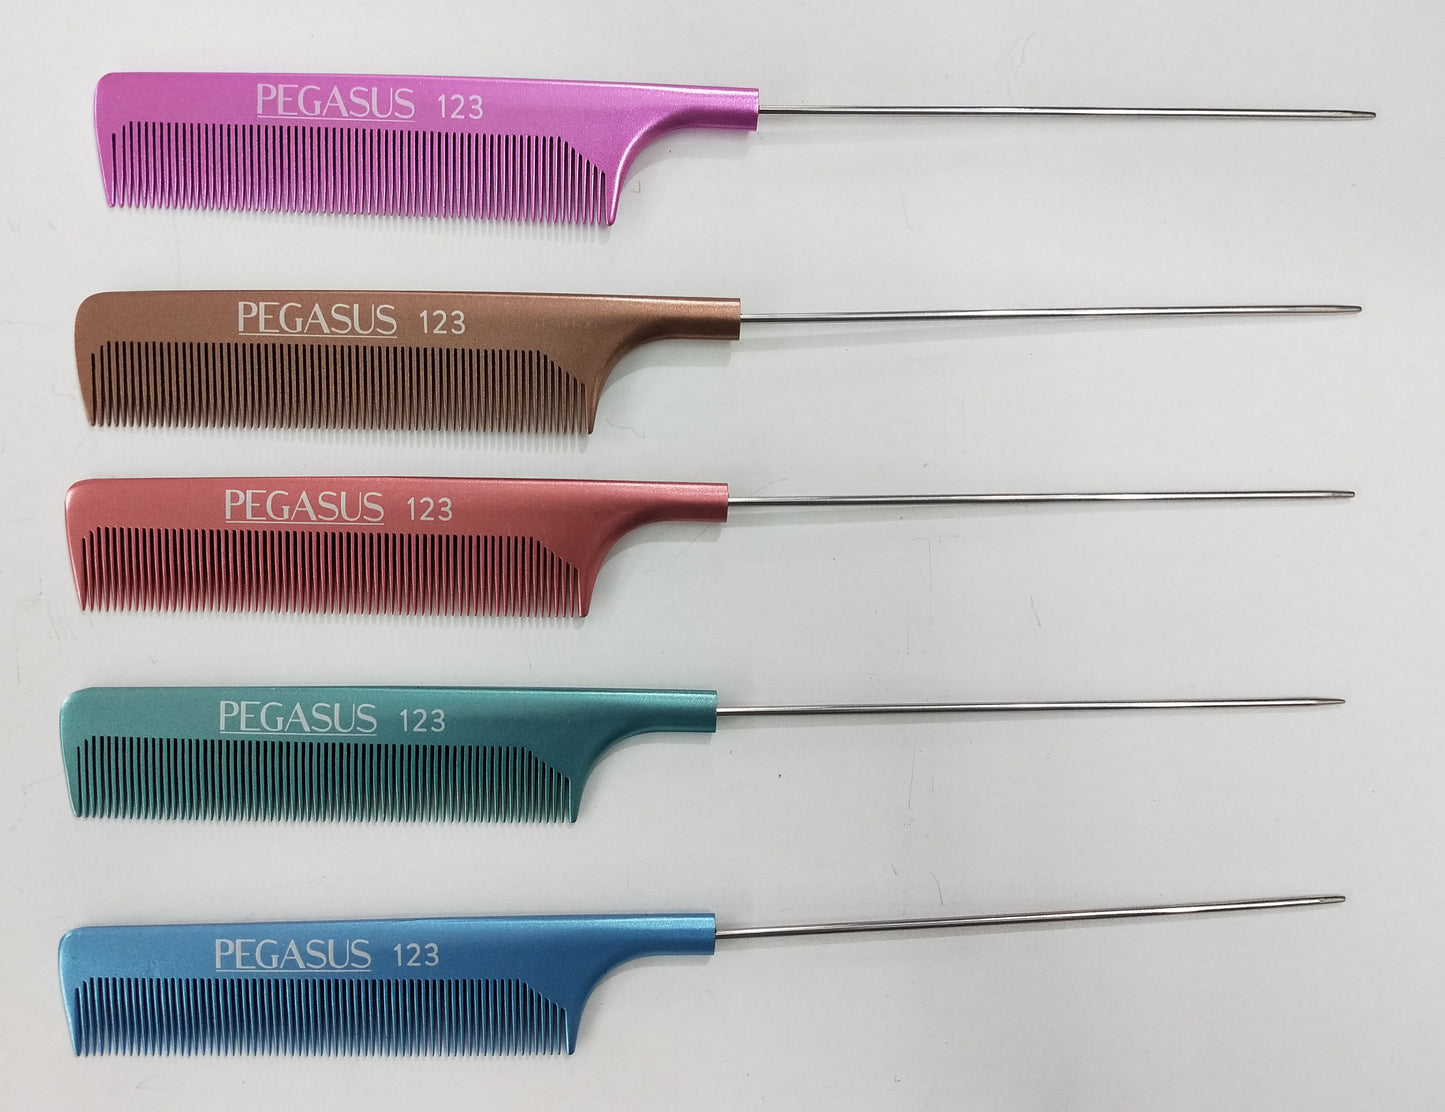 Pegasus MICOLOR 123, 9.75in Hard Rubber Fine Tooth Pintail Comb, Seamless, Anti Static, Heat and Chemically Resistant, Stainless Steel Pin, Great for Parting, Coloring Hair | Peines de goma dura - Pink